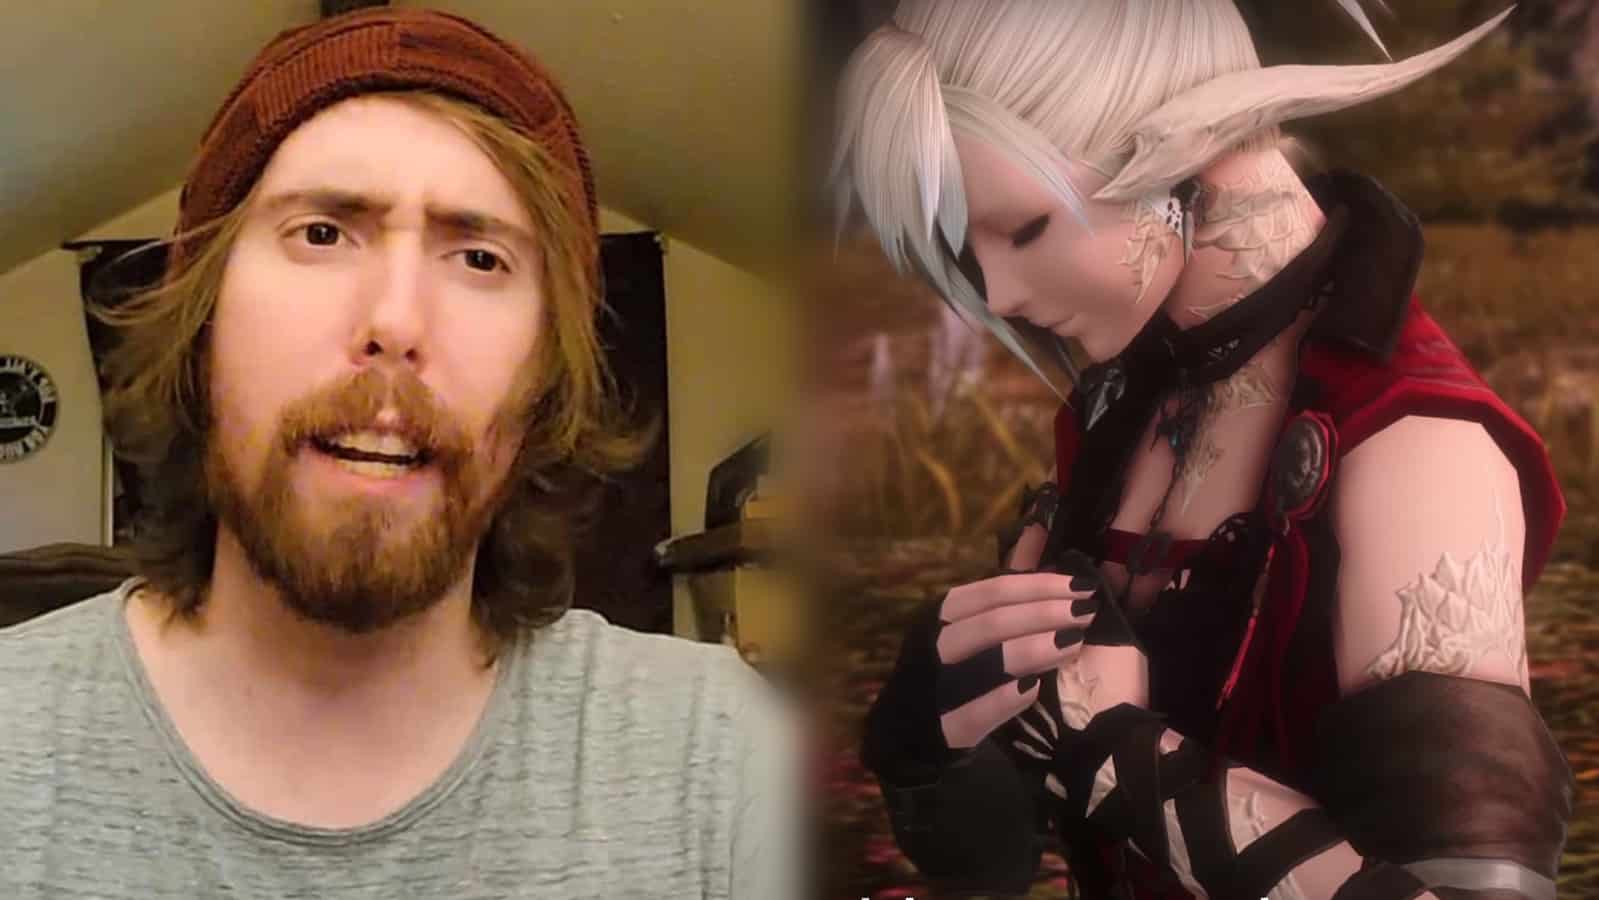 FFXIV dragon lady stands next to twitch streamer Asmongold